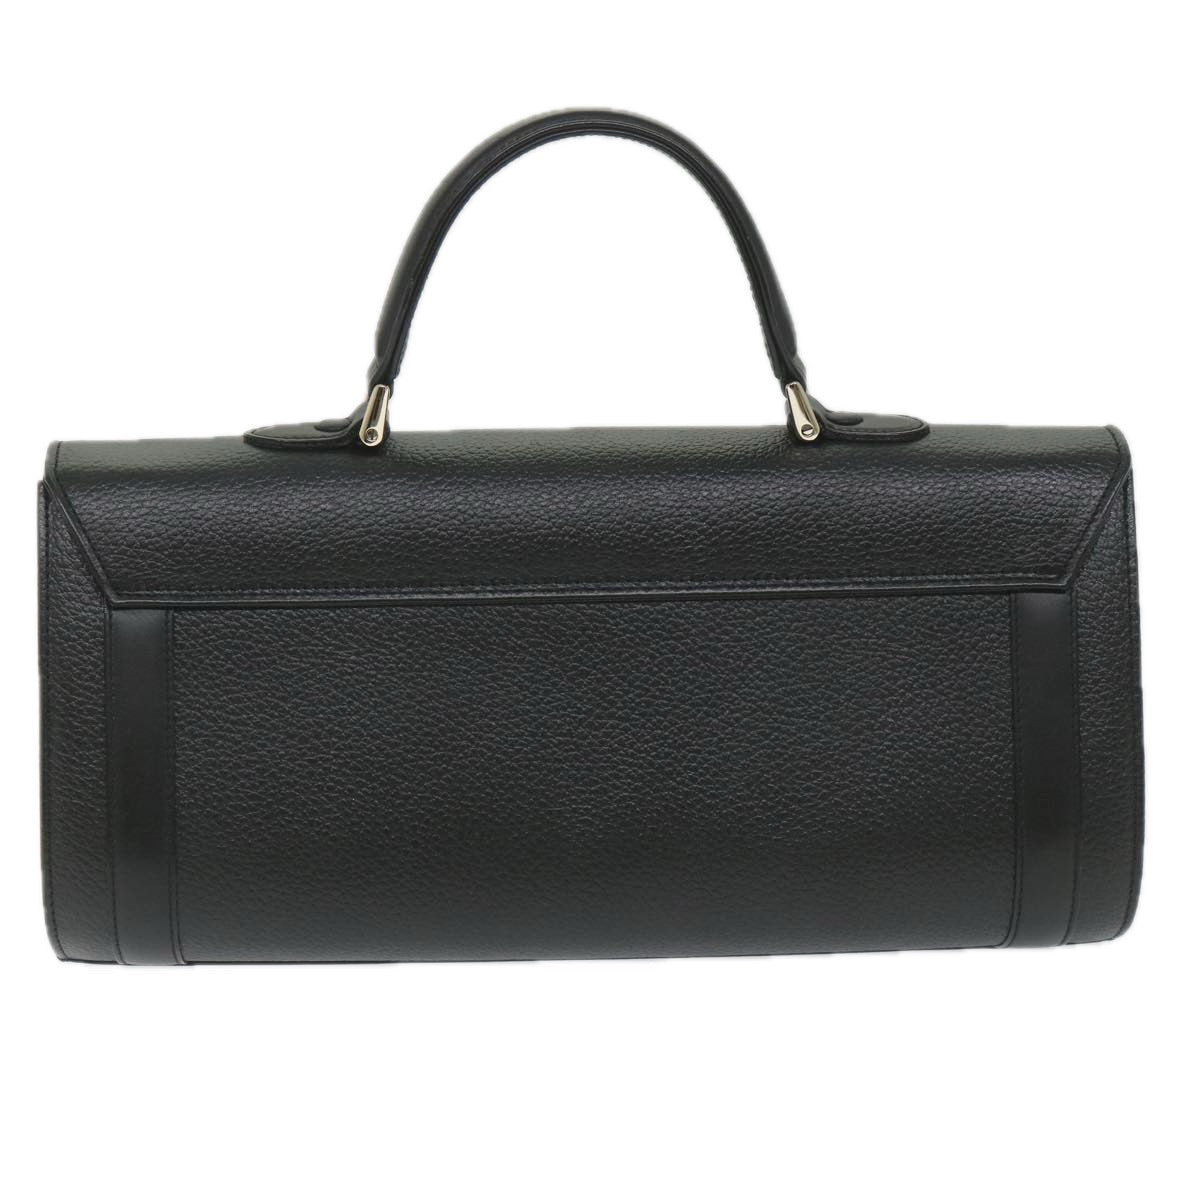 Burberrys Hand Bag Leather Black Auth ep2109 - 0